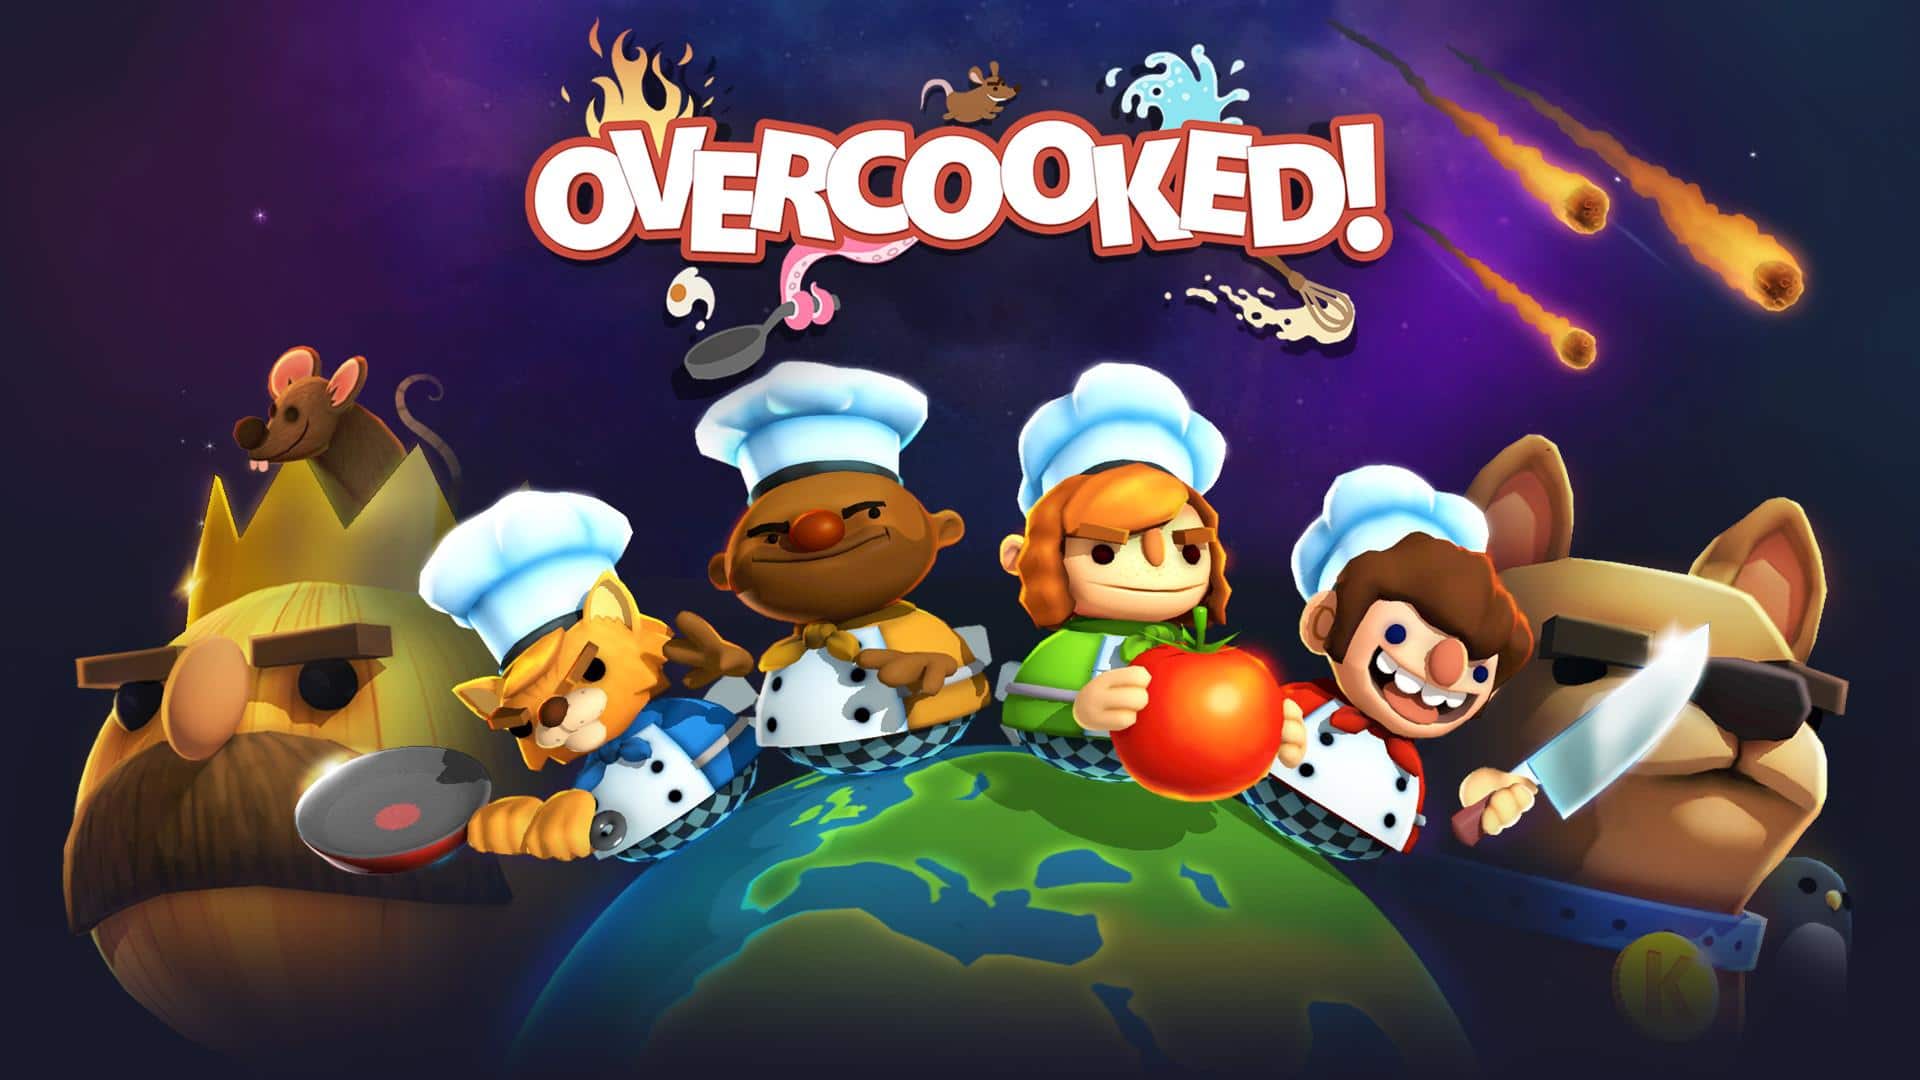 Pick Up Overcooked For Free On The Epic Games Store